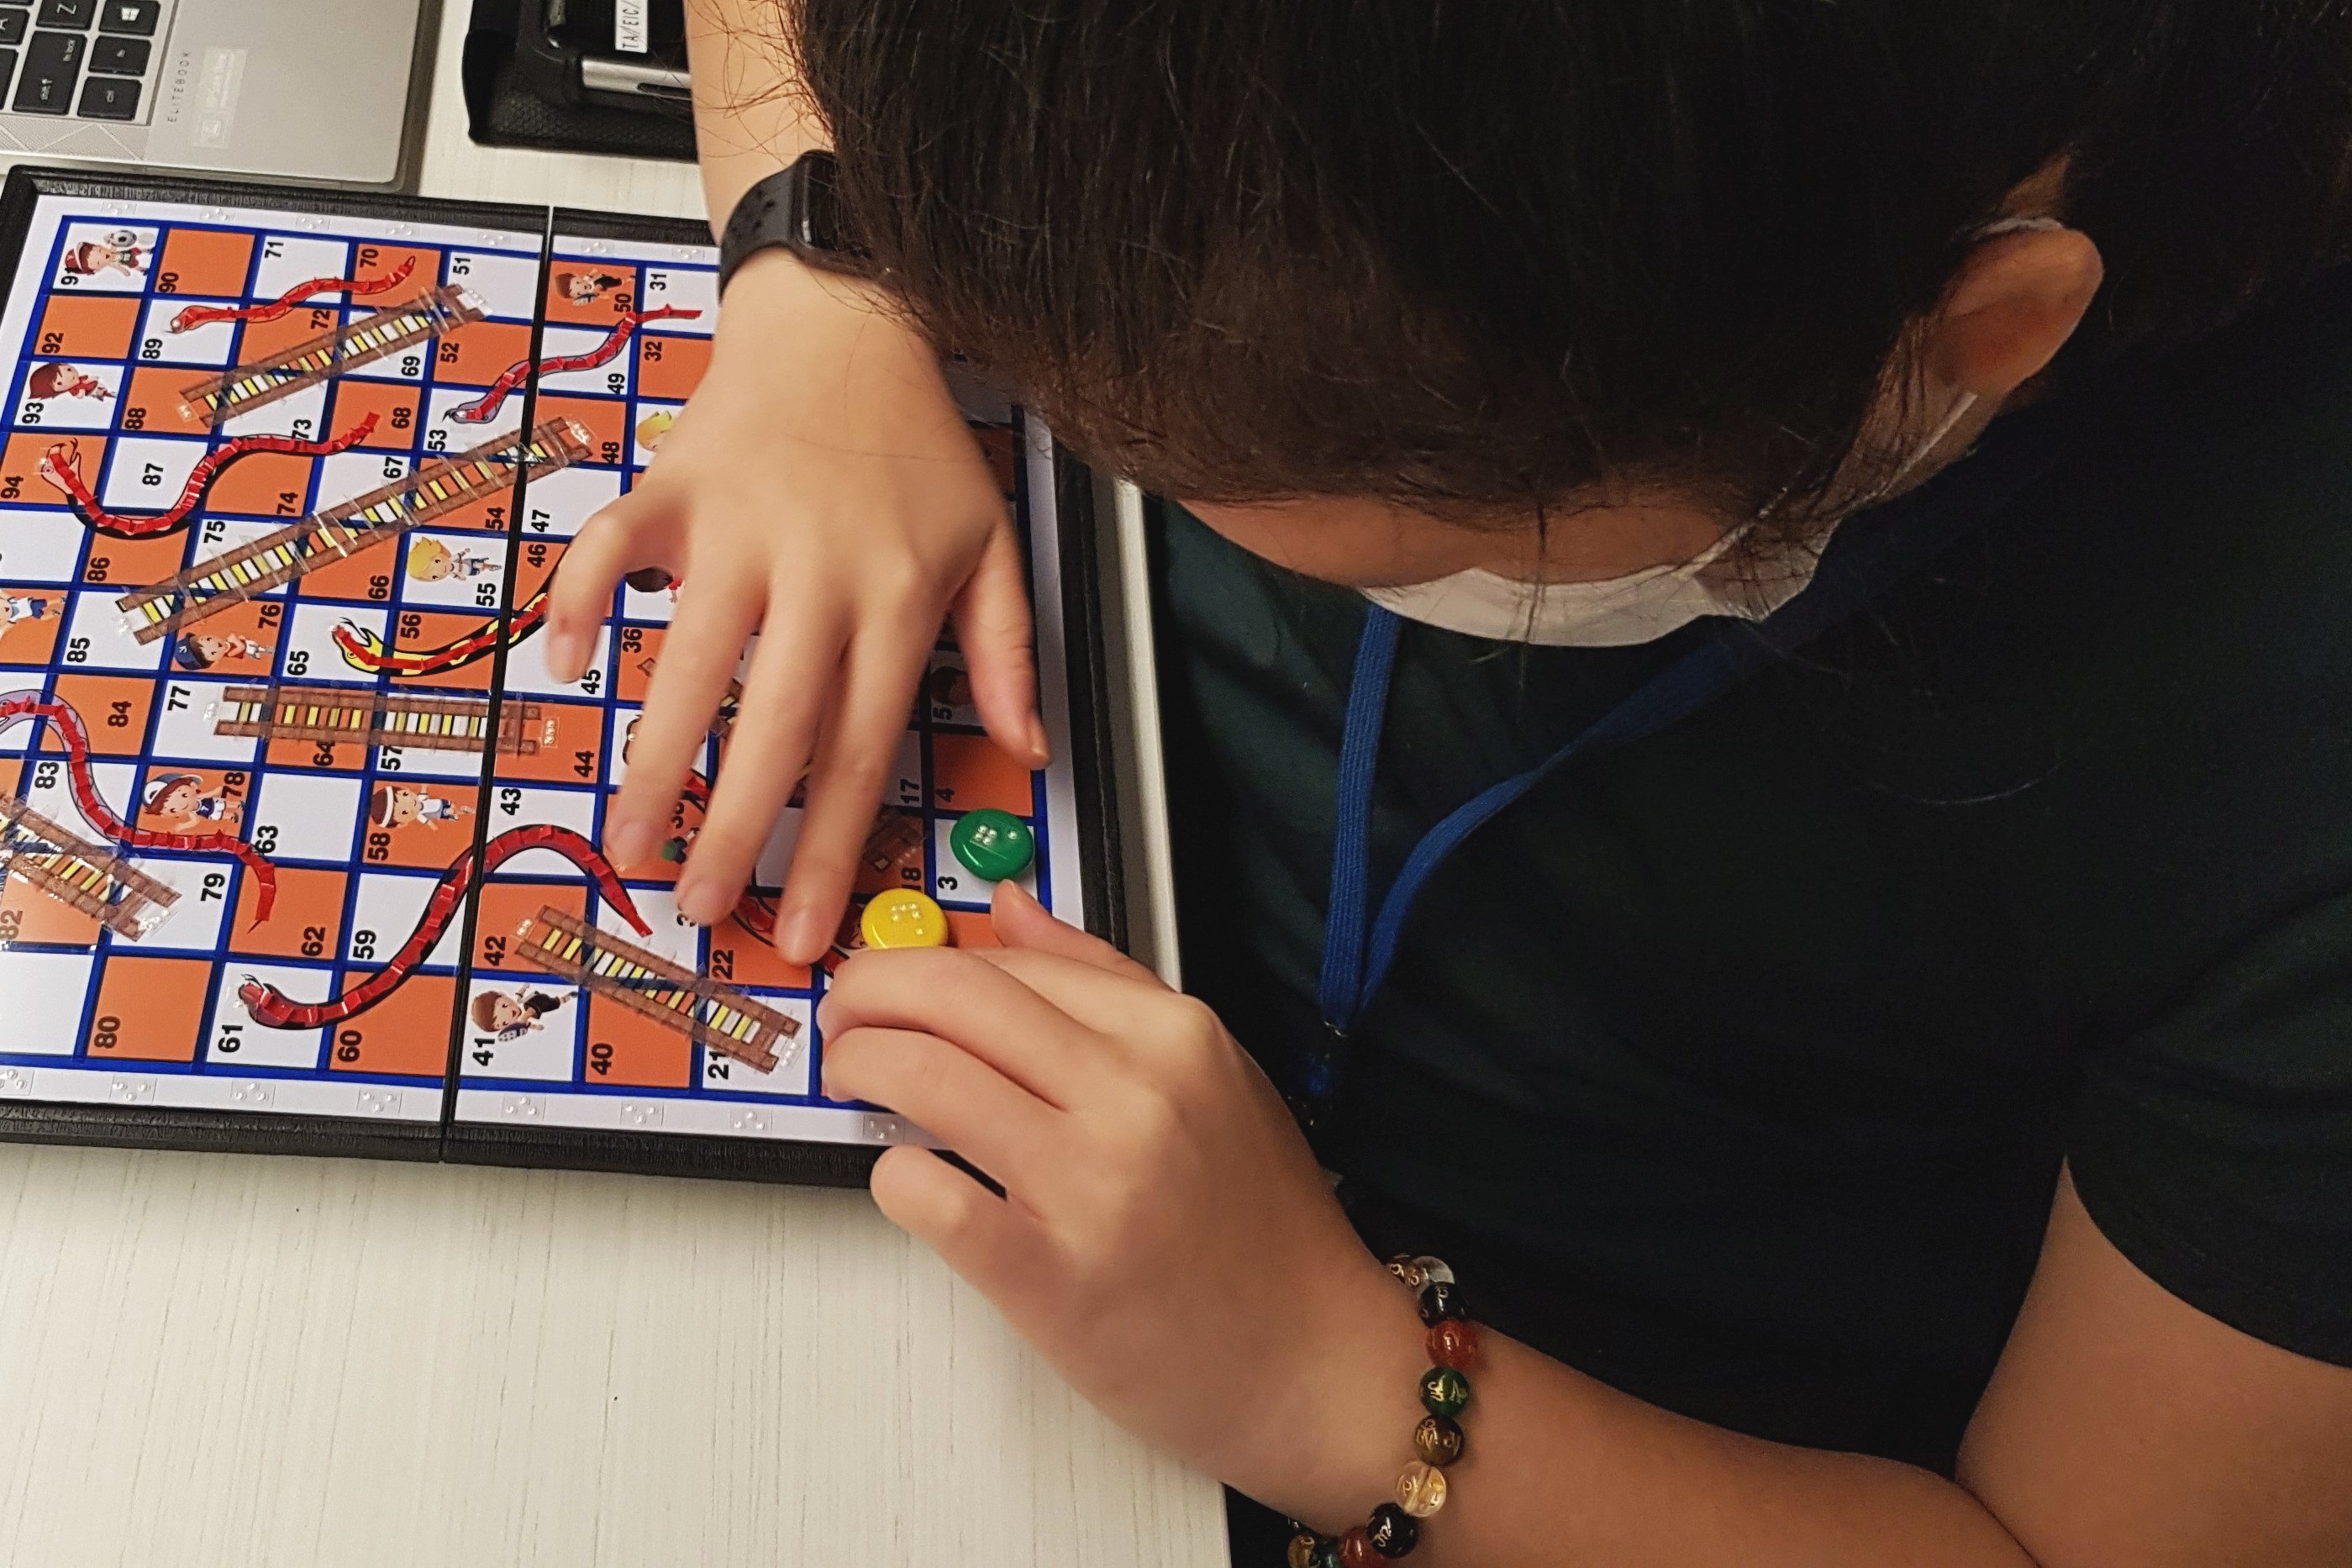 Photo of Siew Ling touching the board of the Snakes and Ladders game, which has been made accessible with tactile images for the ladders and snakes printed on the board.